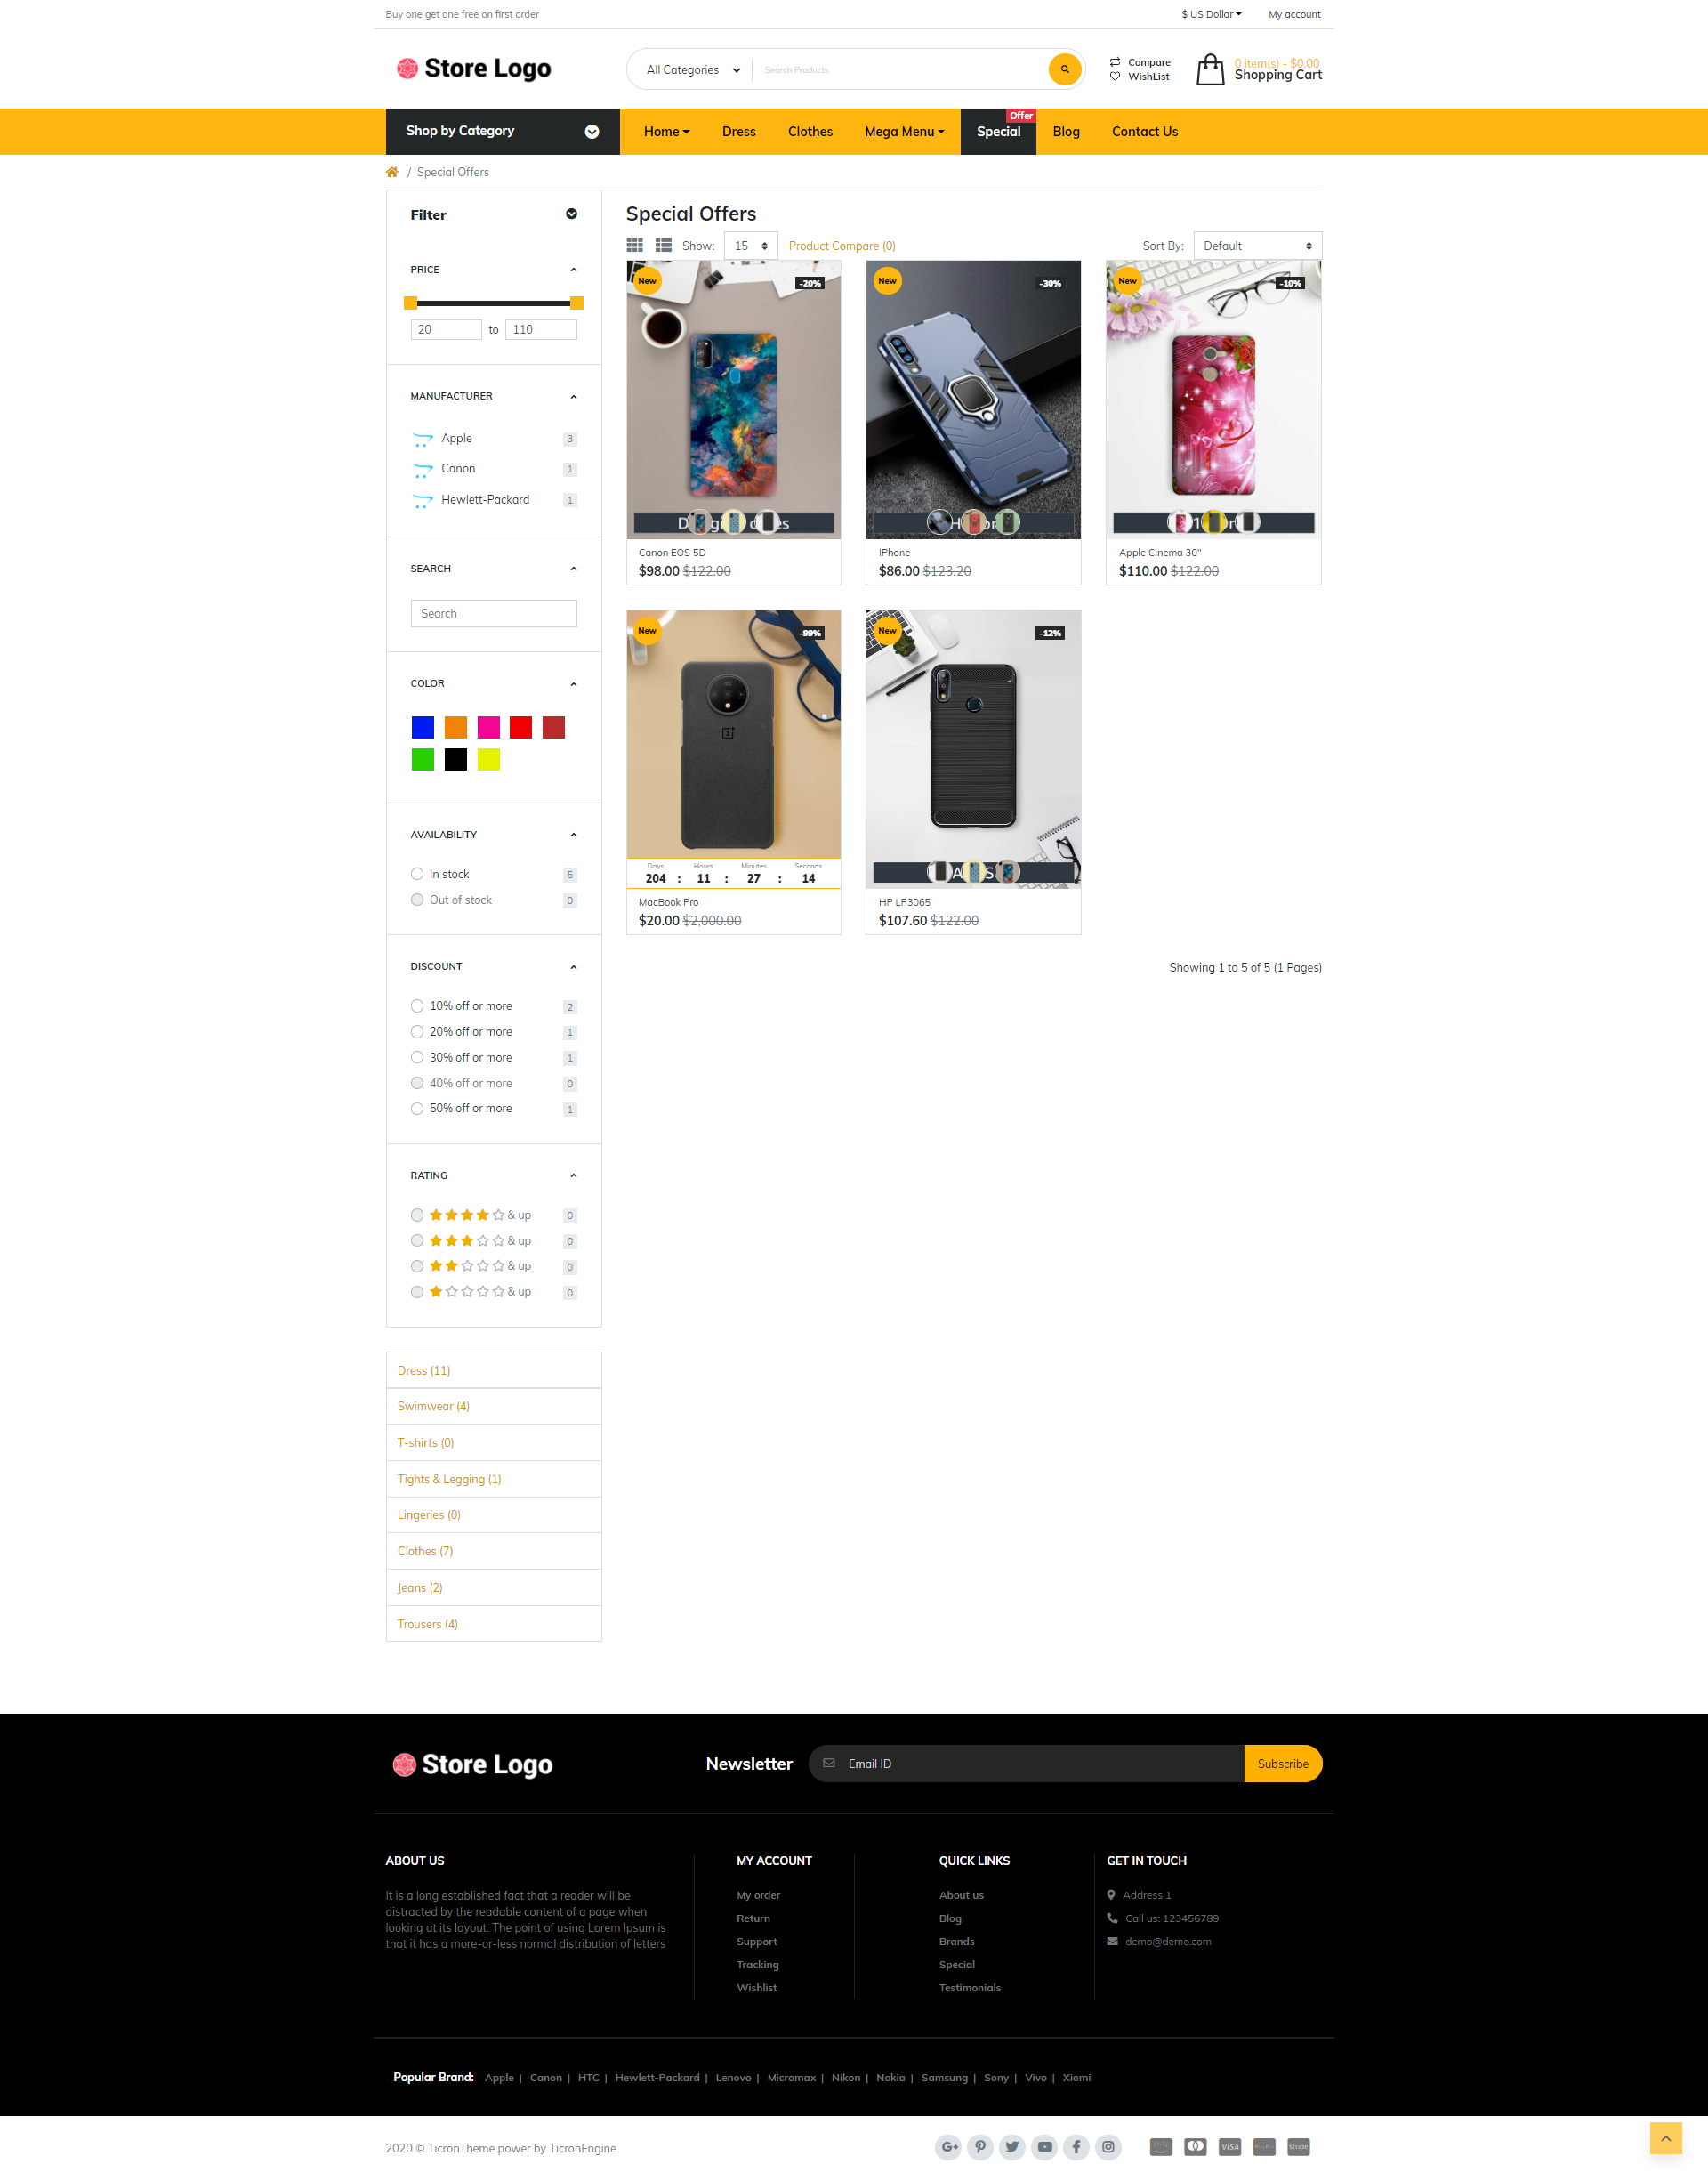 Grand Mobile case Opencart fully responsive theme